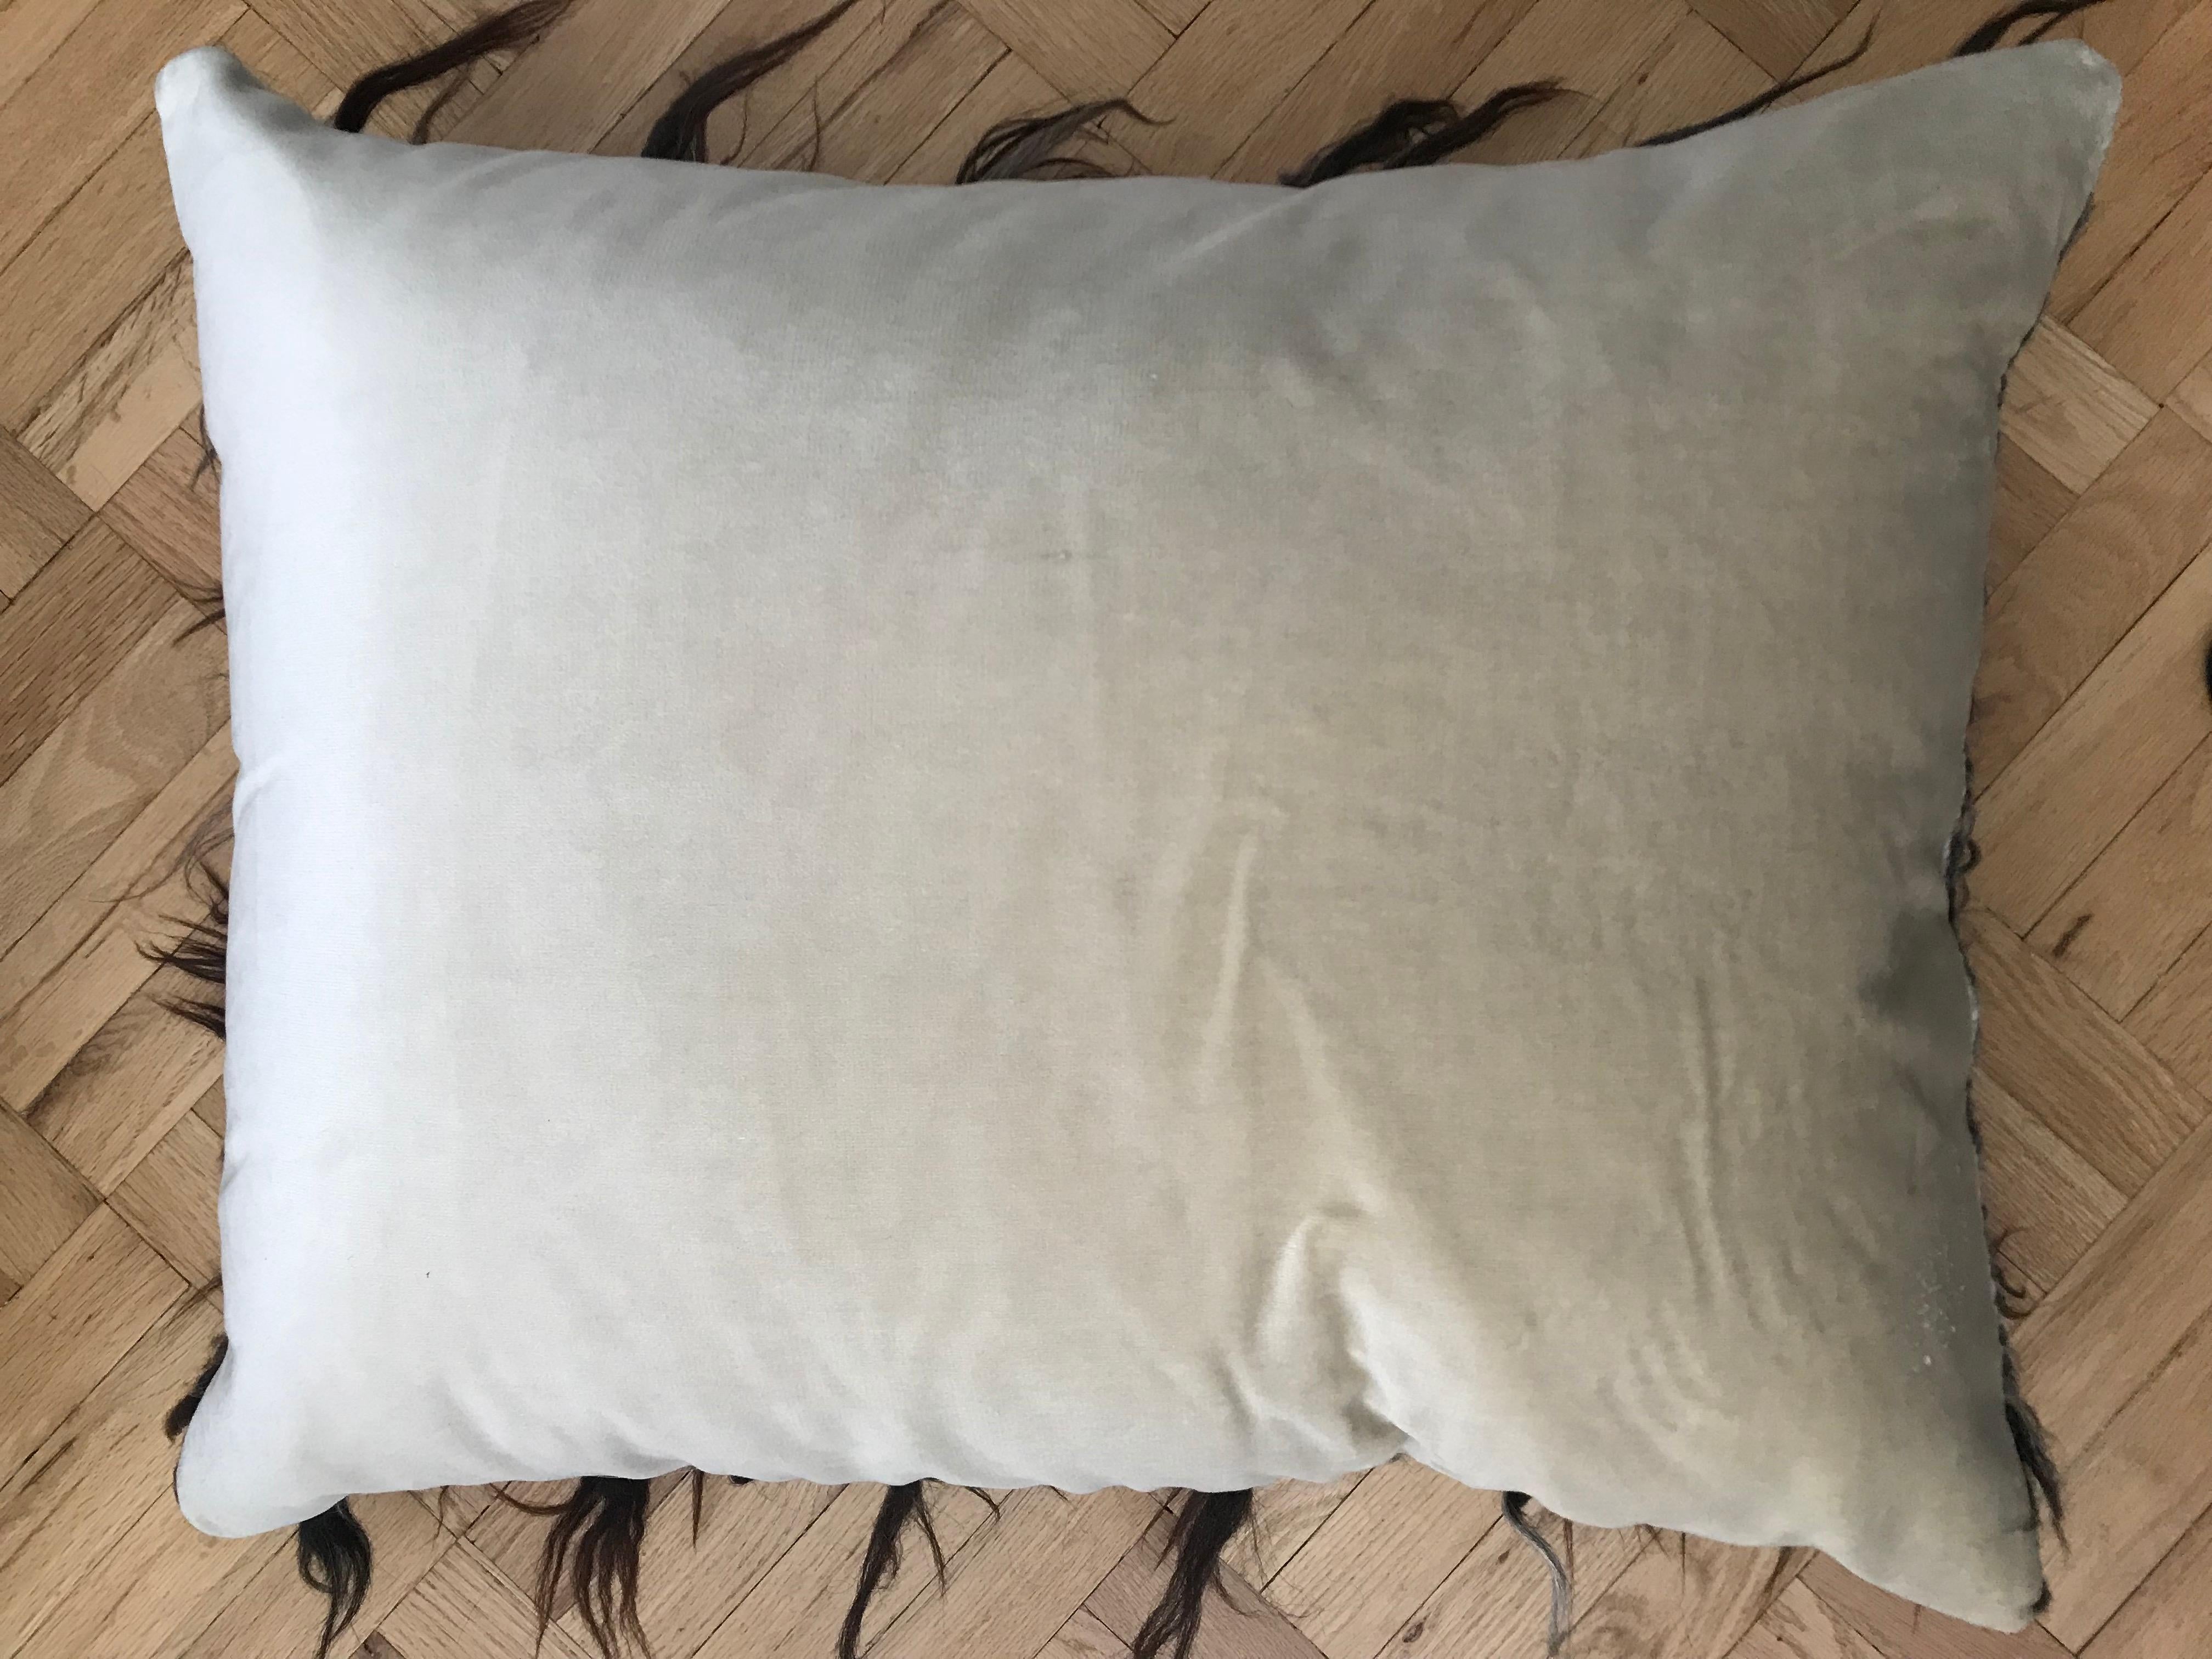 Hand-Woven Black and White 'Trousseau' Handwoven Felted Organic Wool Pillow For Sale